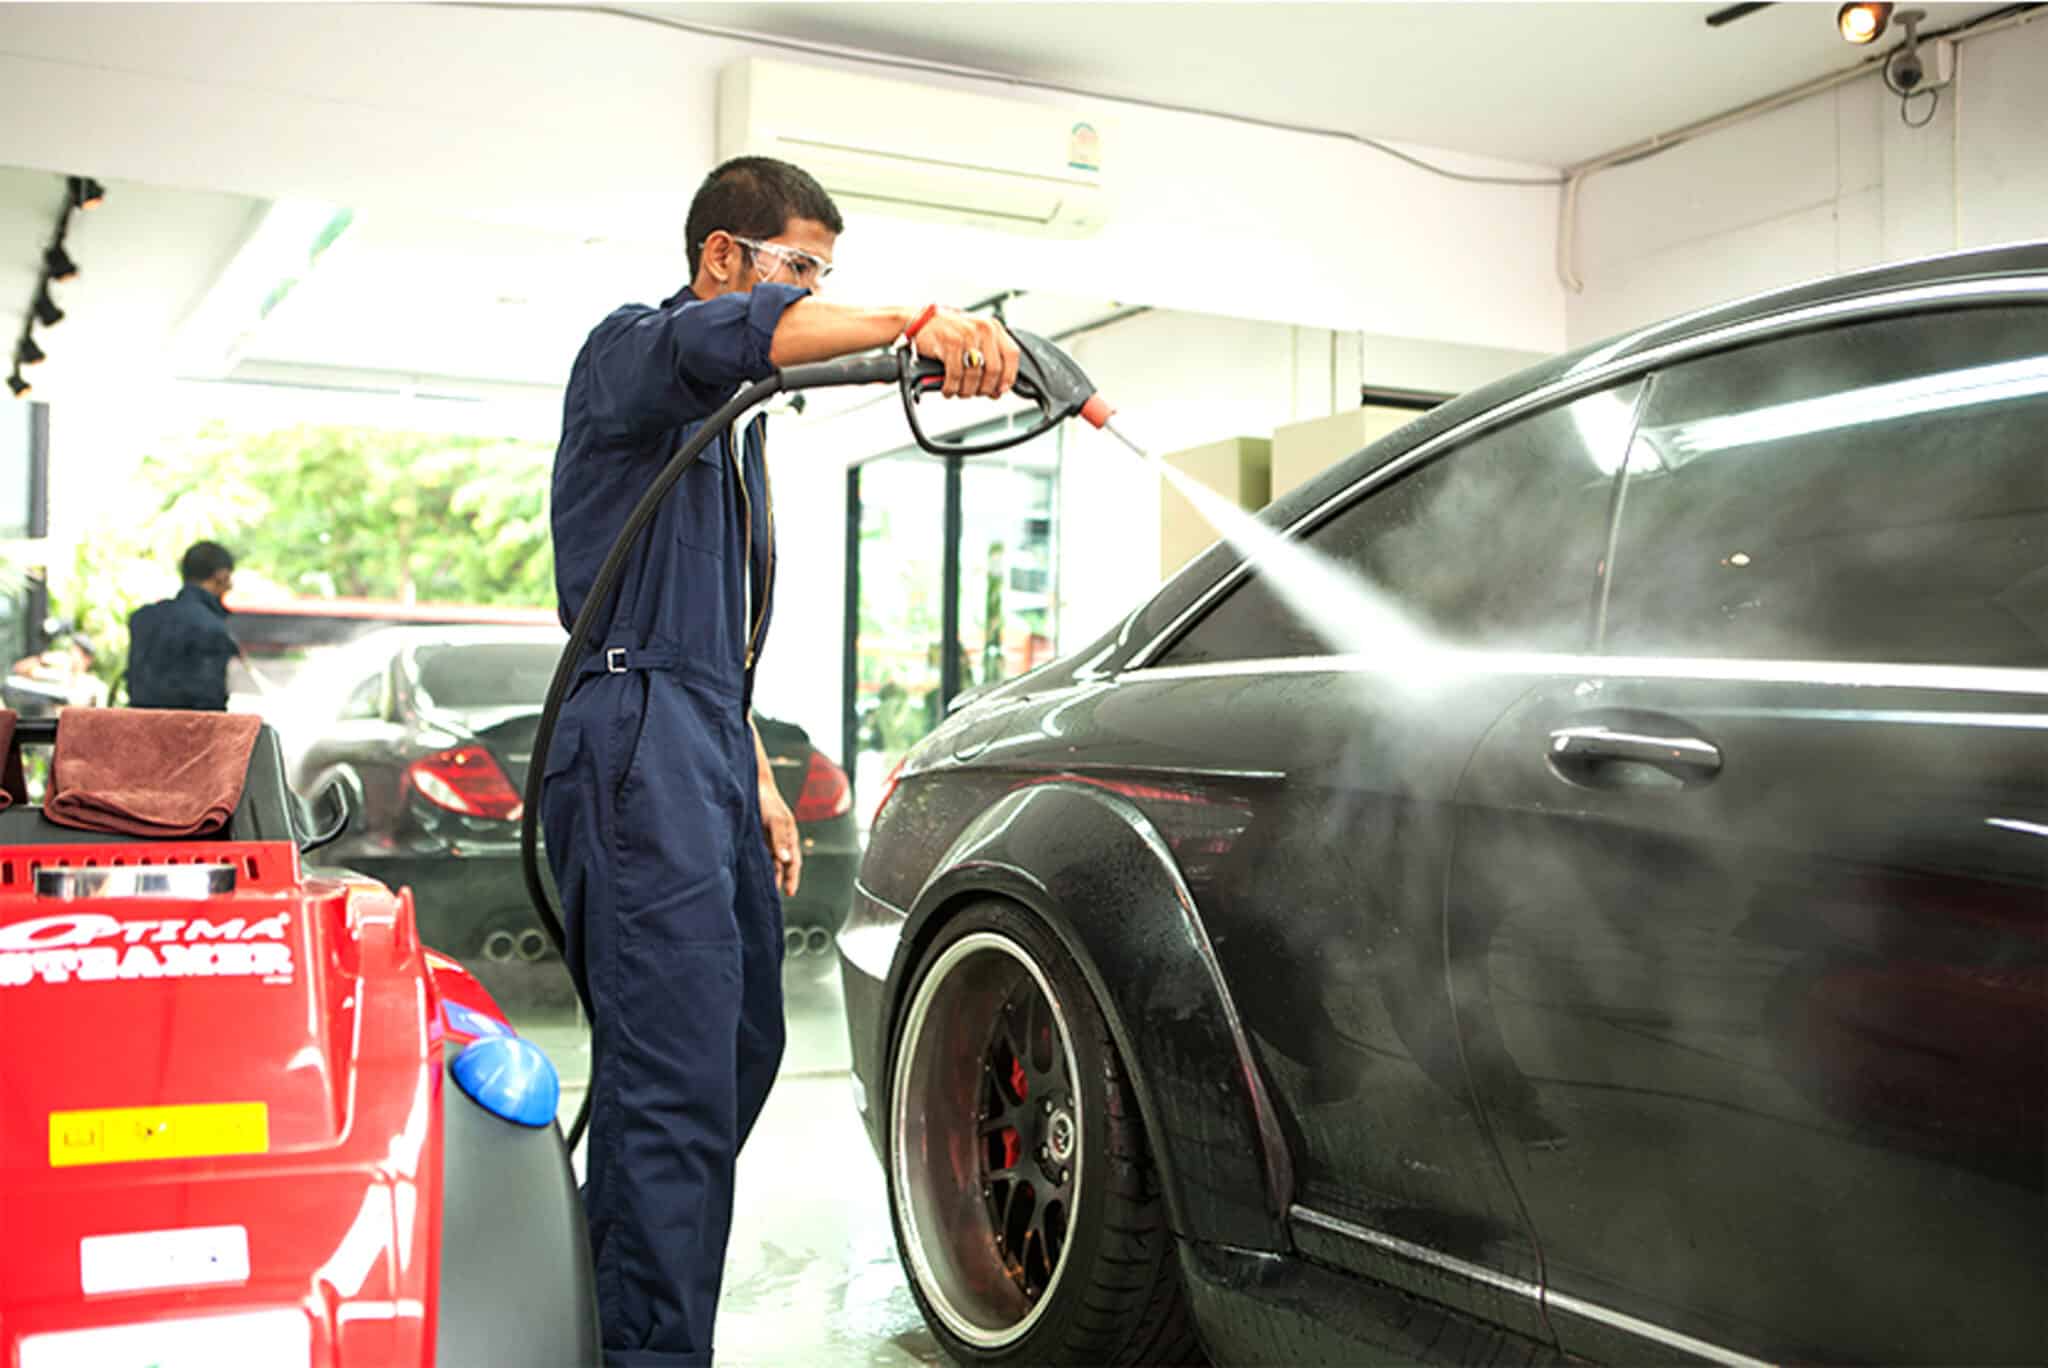 Car Detailing Specialist in New Jersey